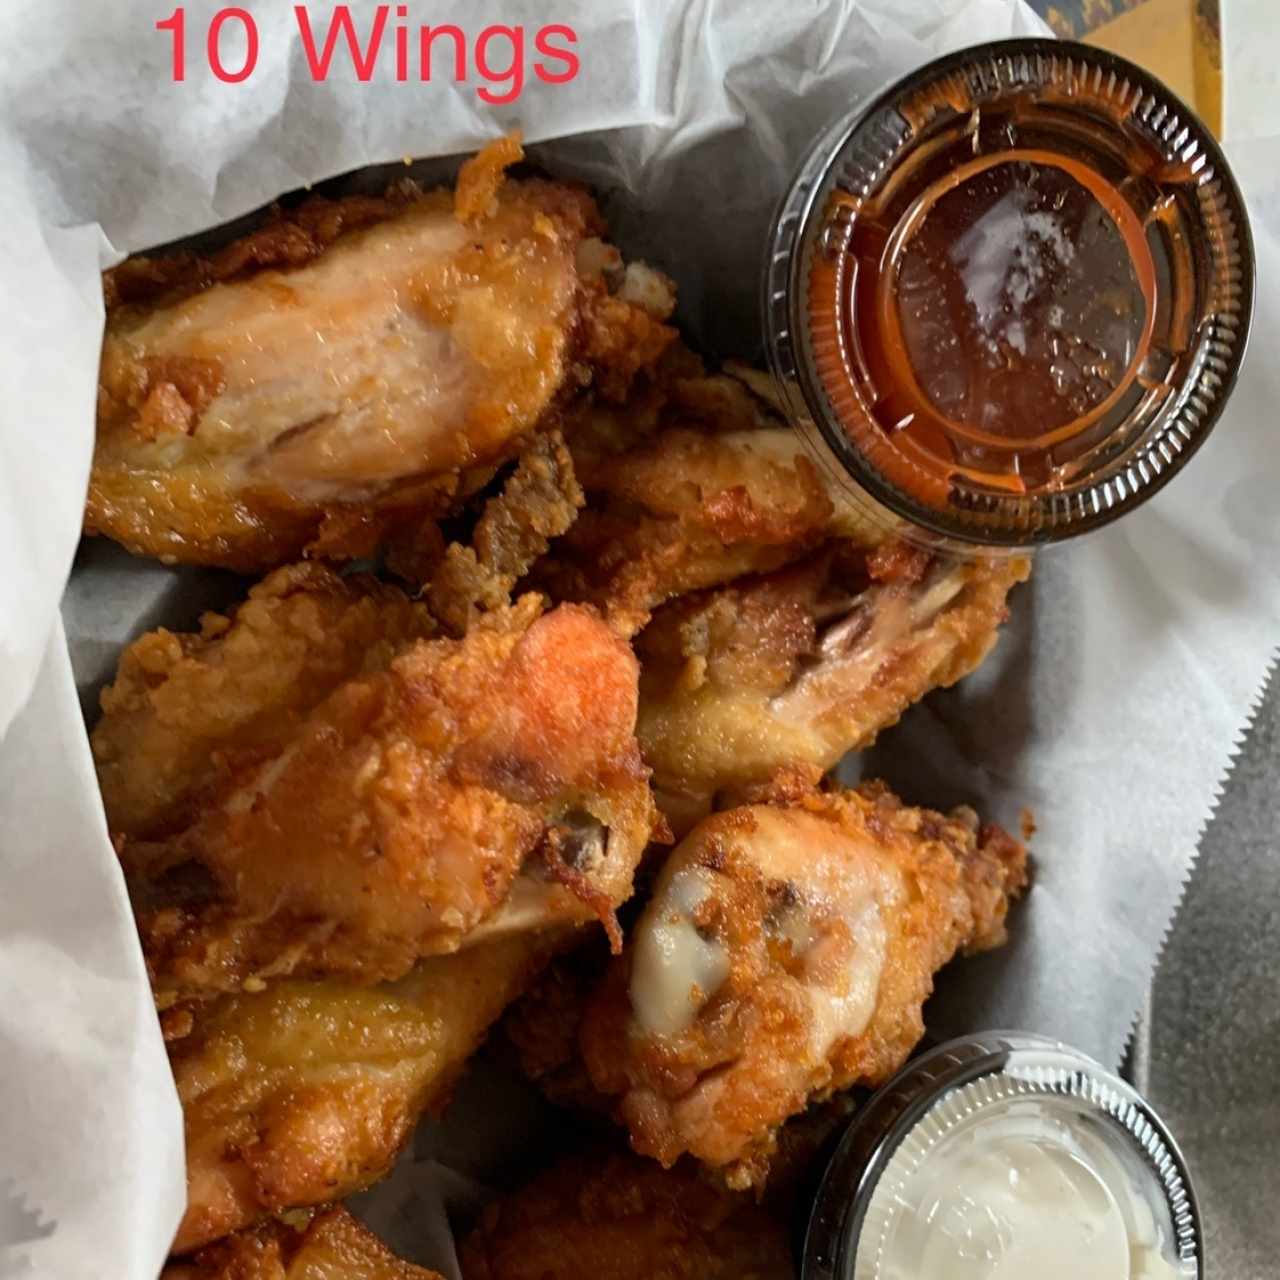 10 Wings with Sweet Chilli Sauce & Garlic Parmesan Sauce